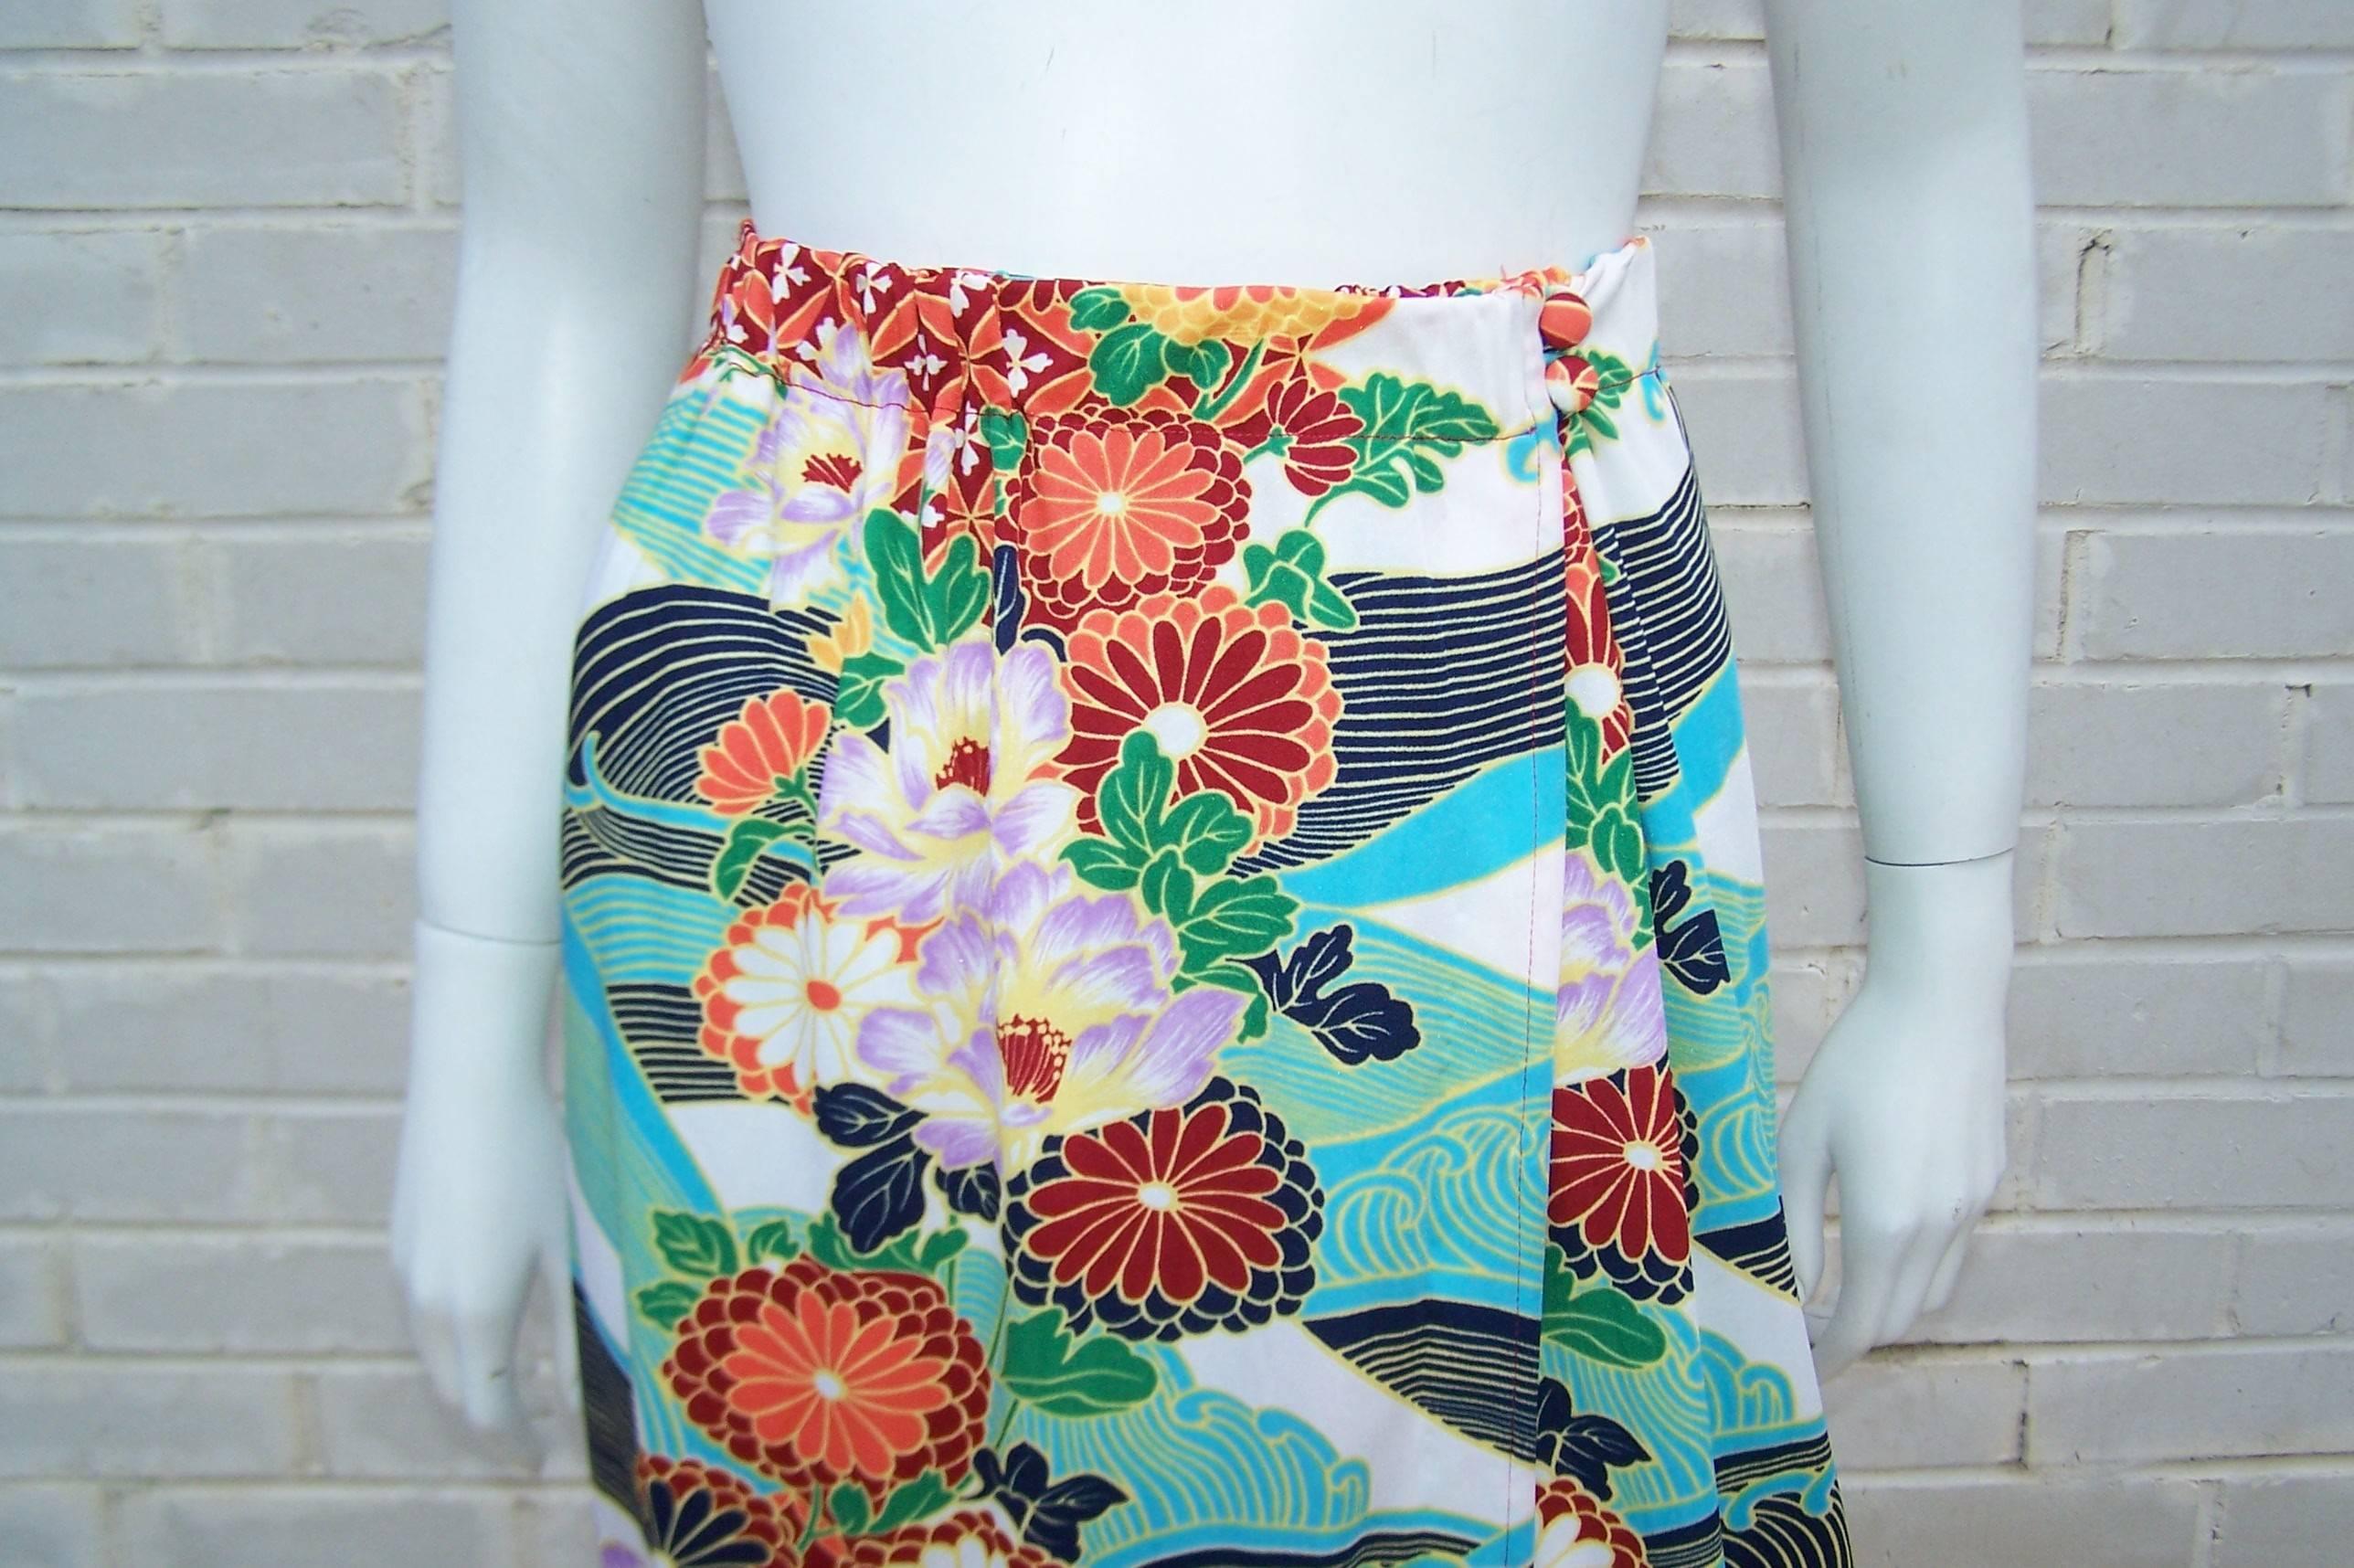 Lea Gottlieb founded Gottex in Israel during the 1950's with the eye to design colorful beach wear stylish enough to go from 'pool to bar'.  This 1970's wrap skirt with an Asian themed floral print with abstract waves is the perfect cover up for